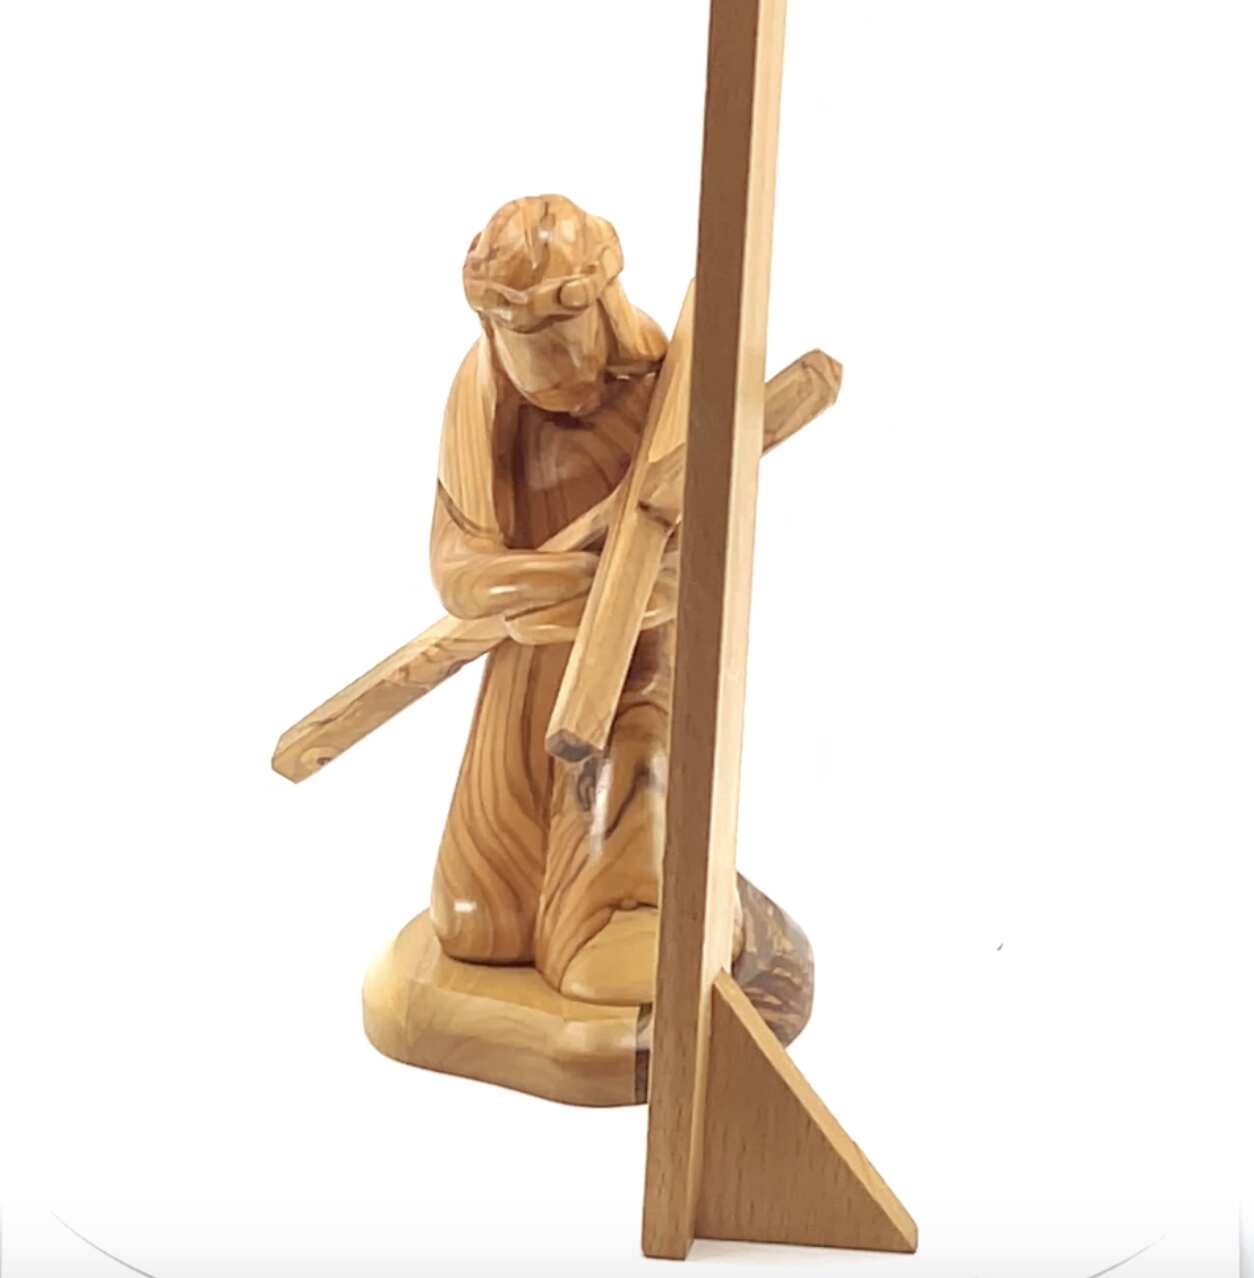 Jesus Christ Kneeling While Holding the Cross, 7.1" Wooden Abstract Carving